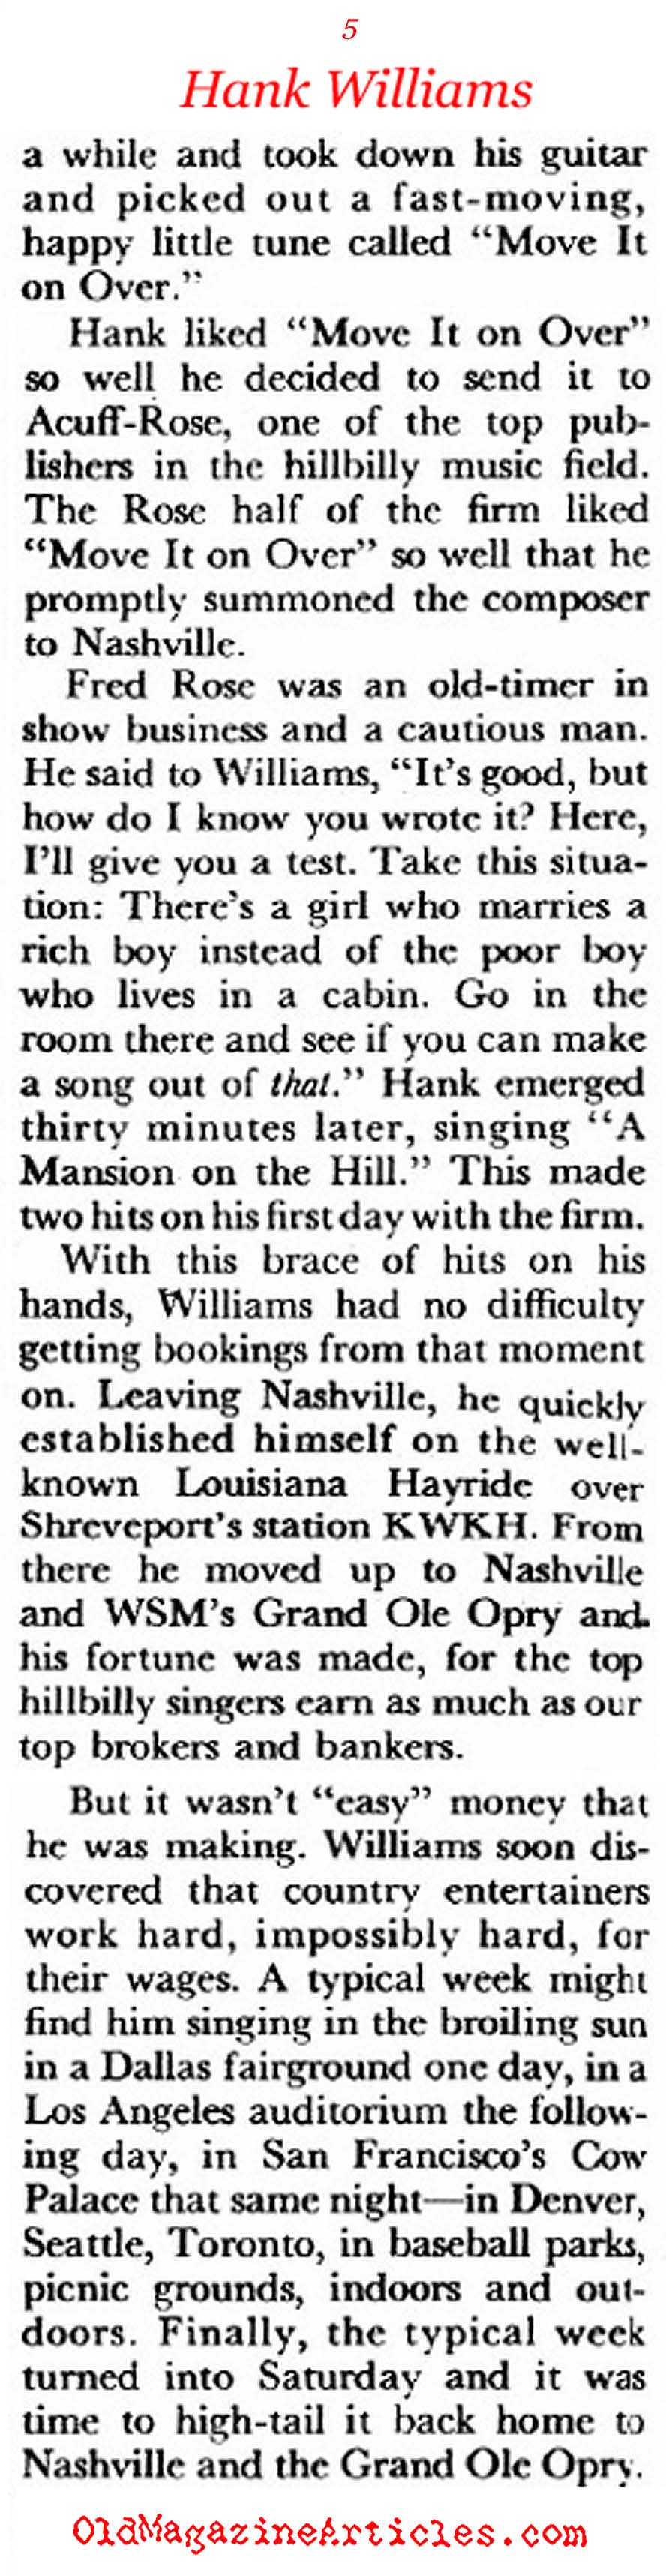 The Life and Death of Hank Williams (Coronet Magazine, 1956)